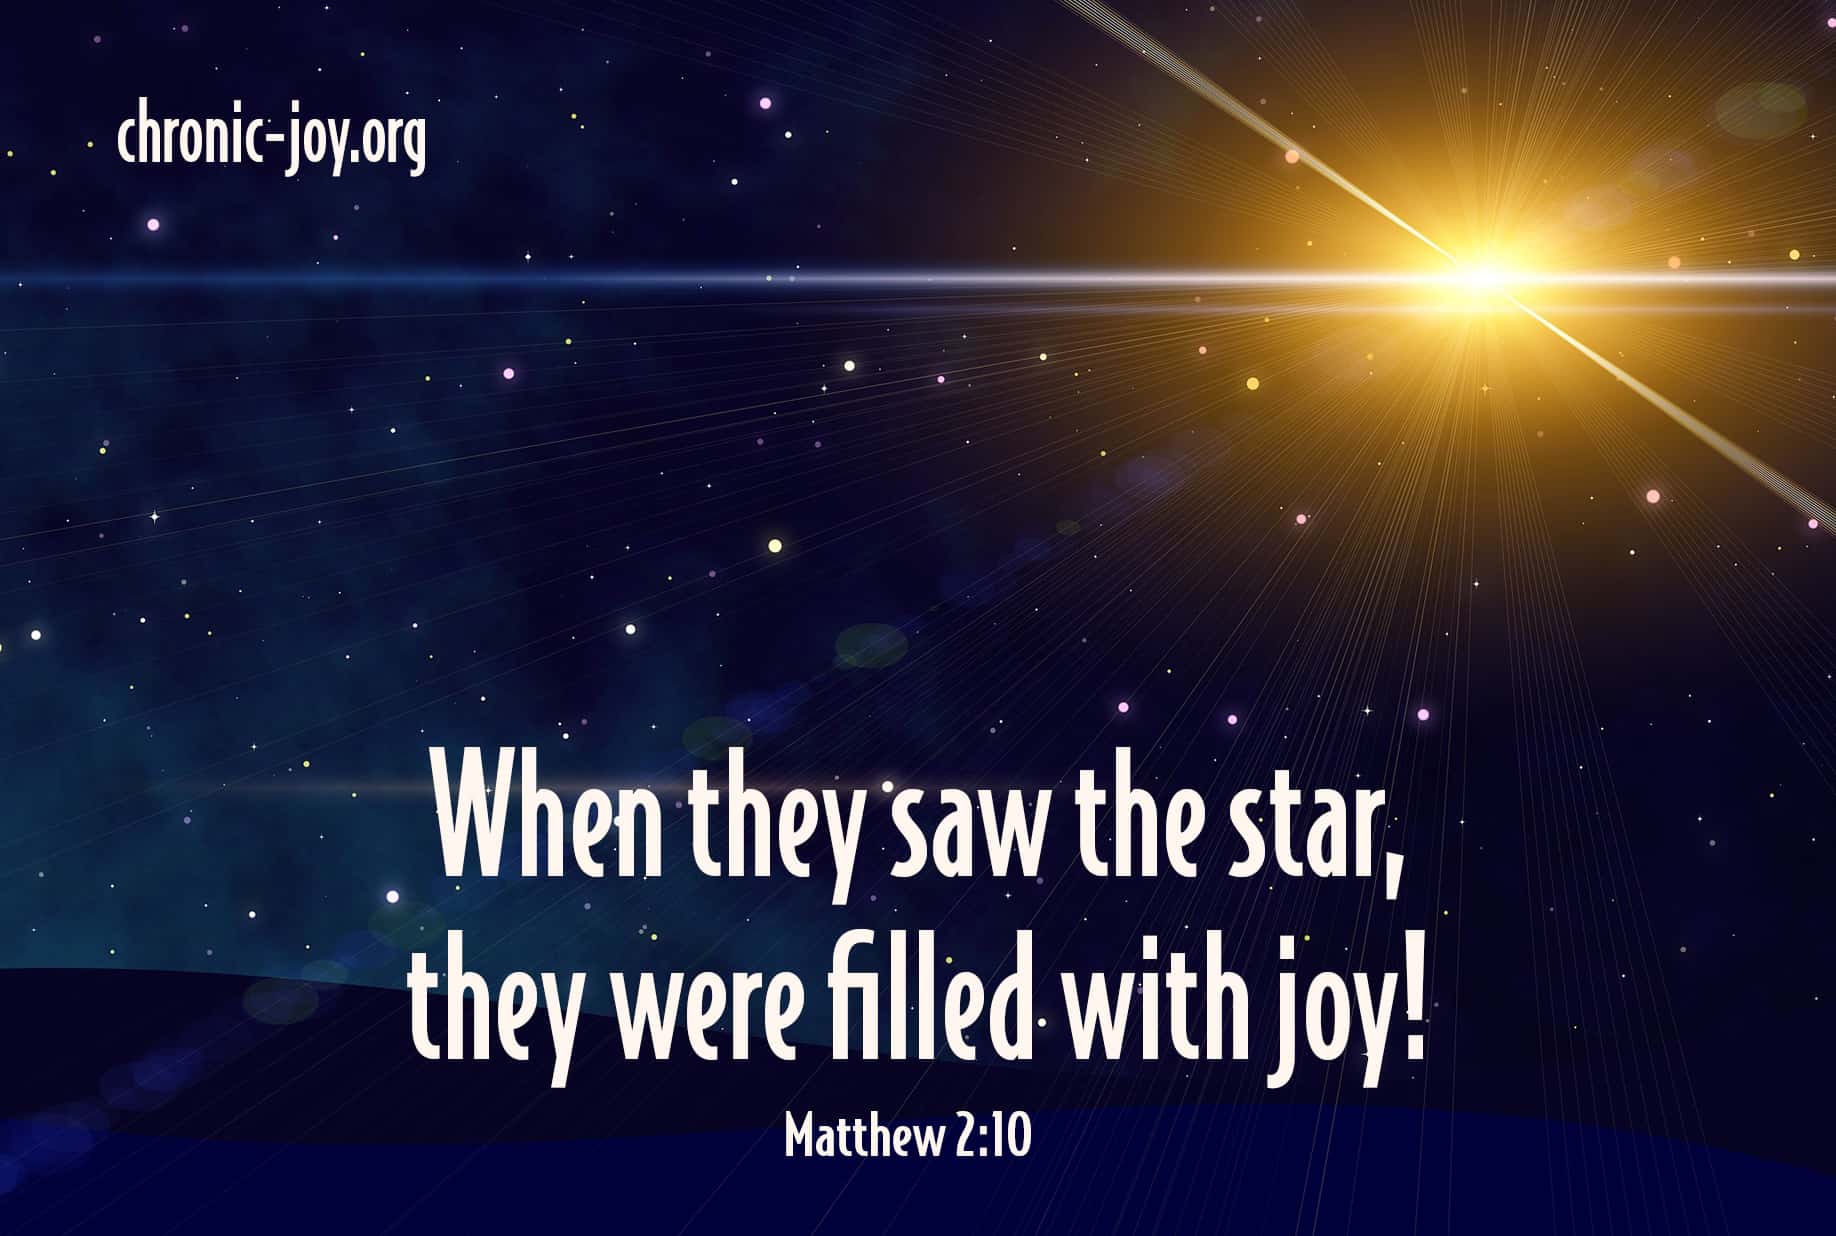 When they saw the star, they were filled with joy! Matthew 2:10